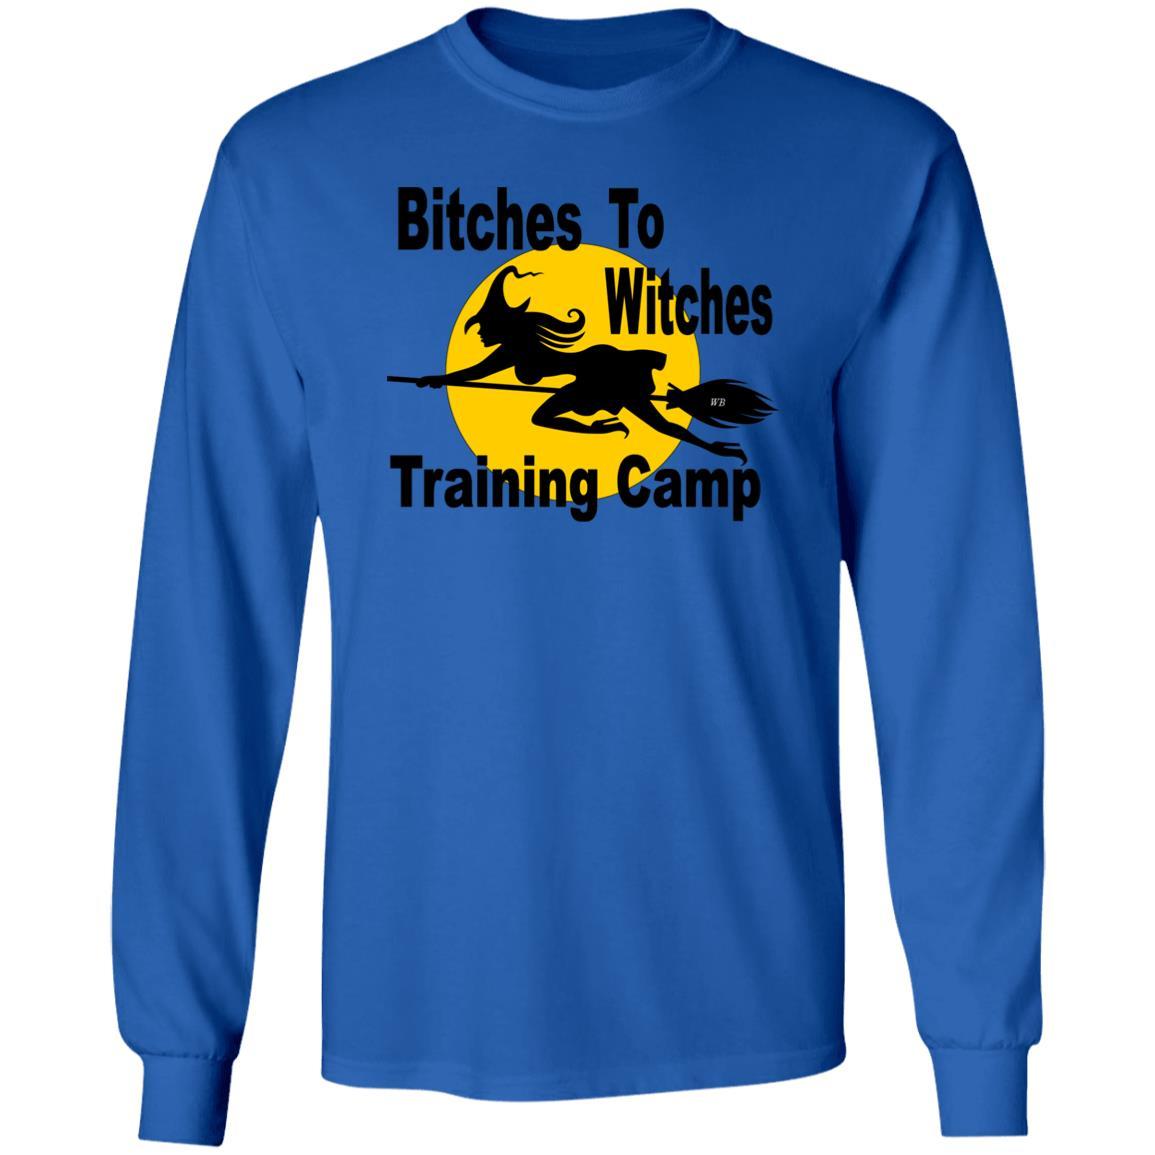 T-Shirts Royal / S WineyBitches.Co "Bitches To Witches Training Camp" LS Ultra Cotton T-Shirt WineyBitchesCo